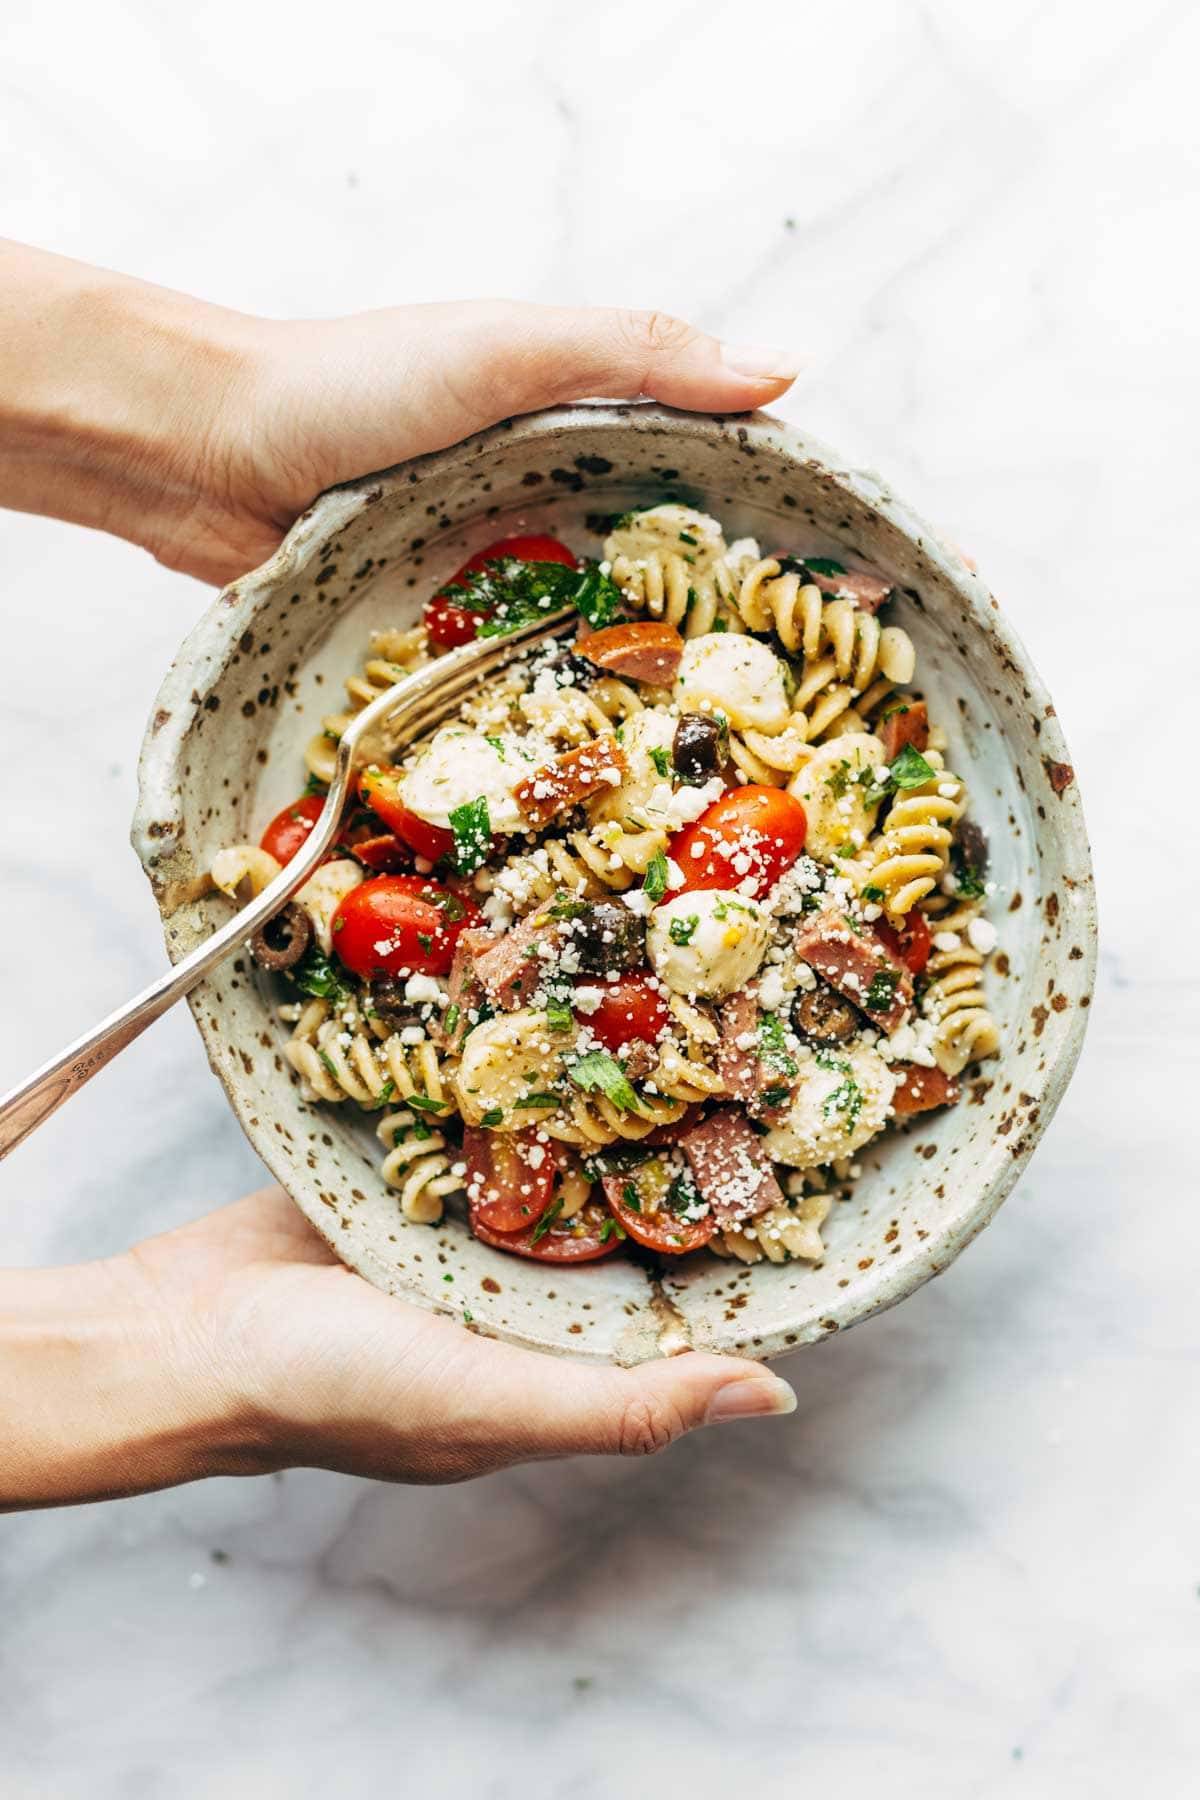 Best Easy Italian Pasta Salad - with pasta, tomatoes, fresh mozzarella, spicy salami, parsley, olives, and easy Italian dressing. Super versatile to what you have on hand! | pinchofyum.comc